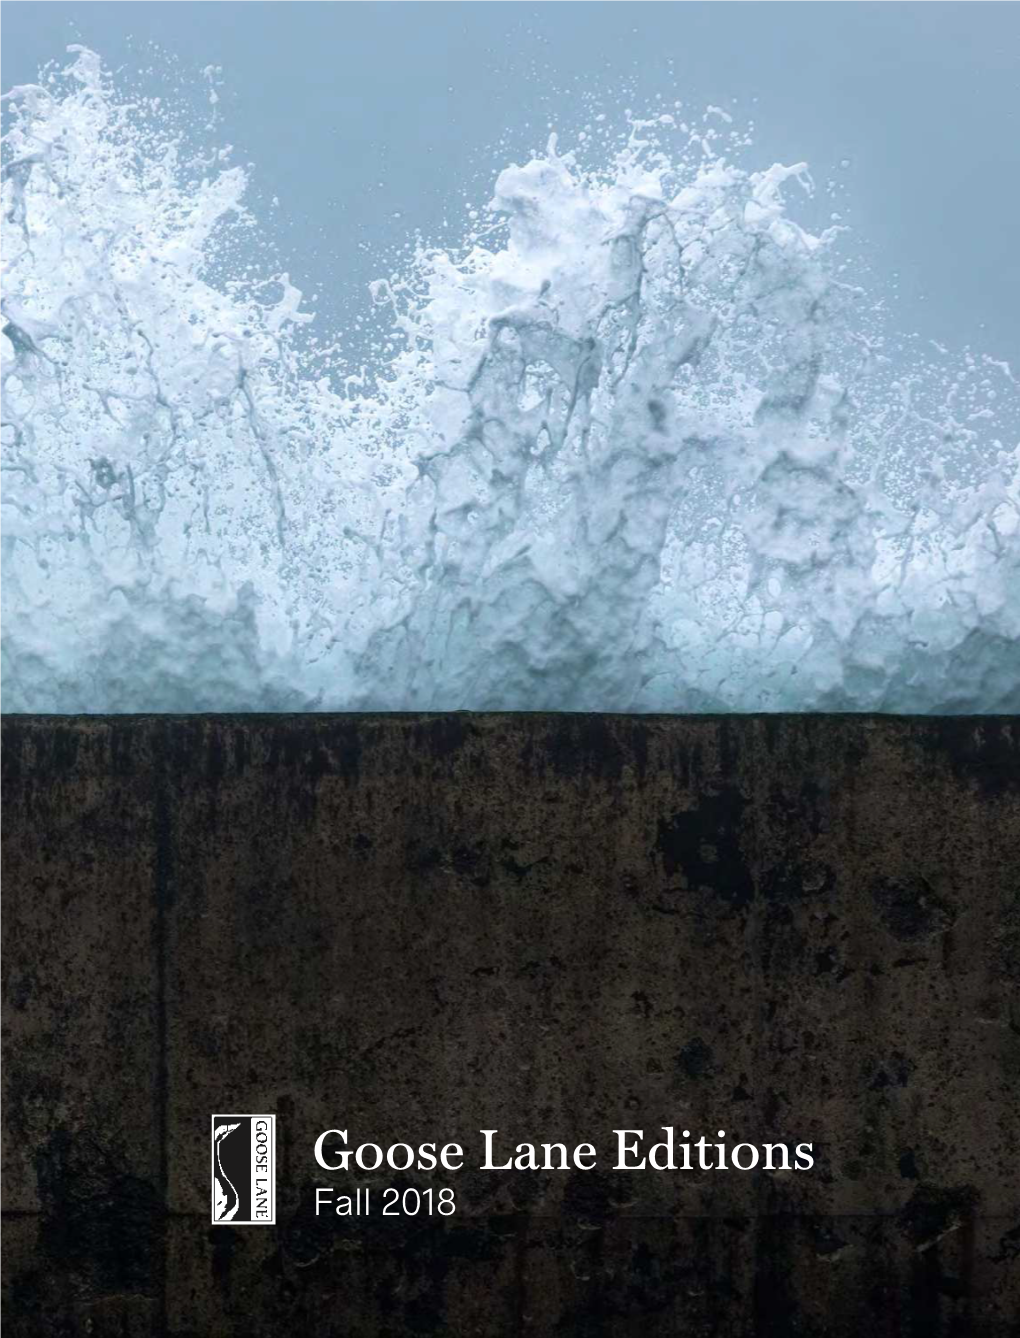 Goose Lane Editions Fall 2018 Where to Begin? with a Heartbeat